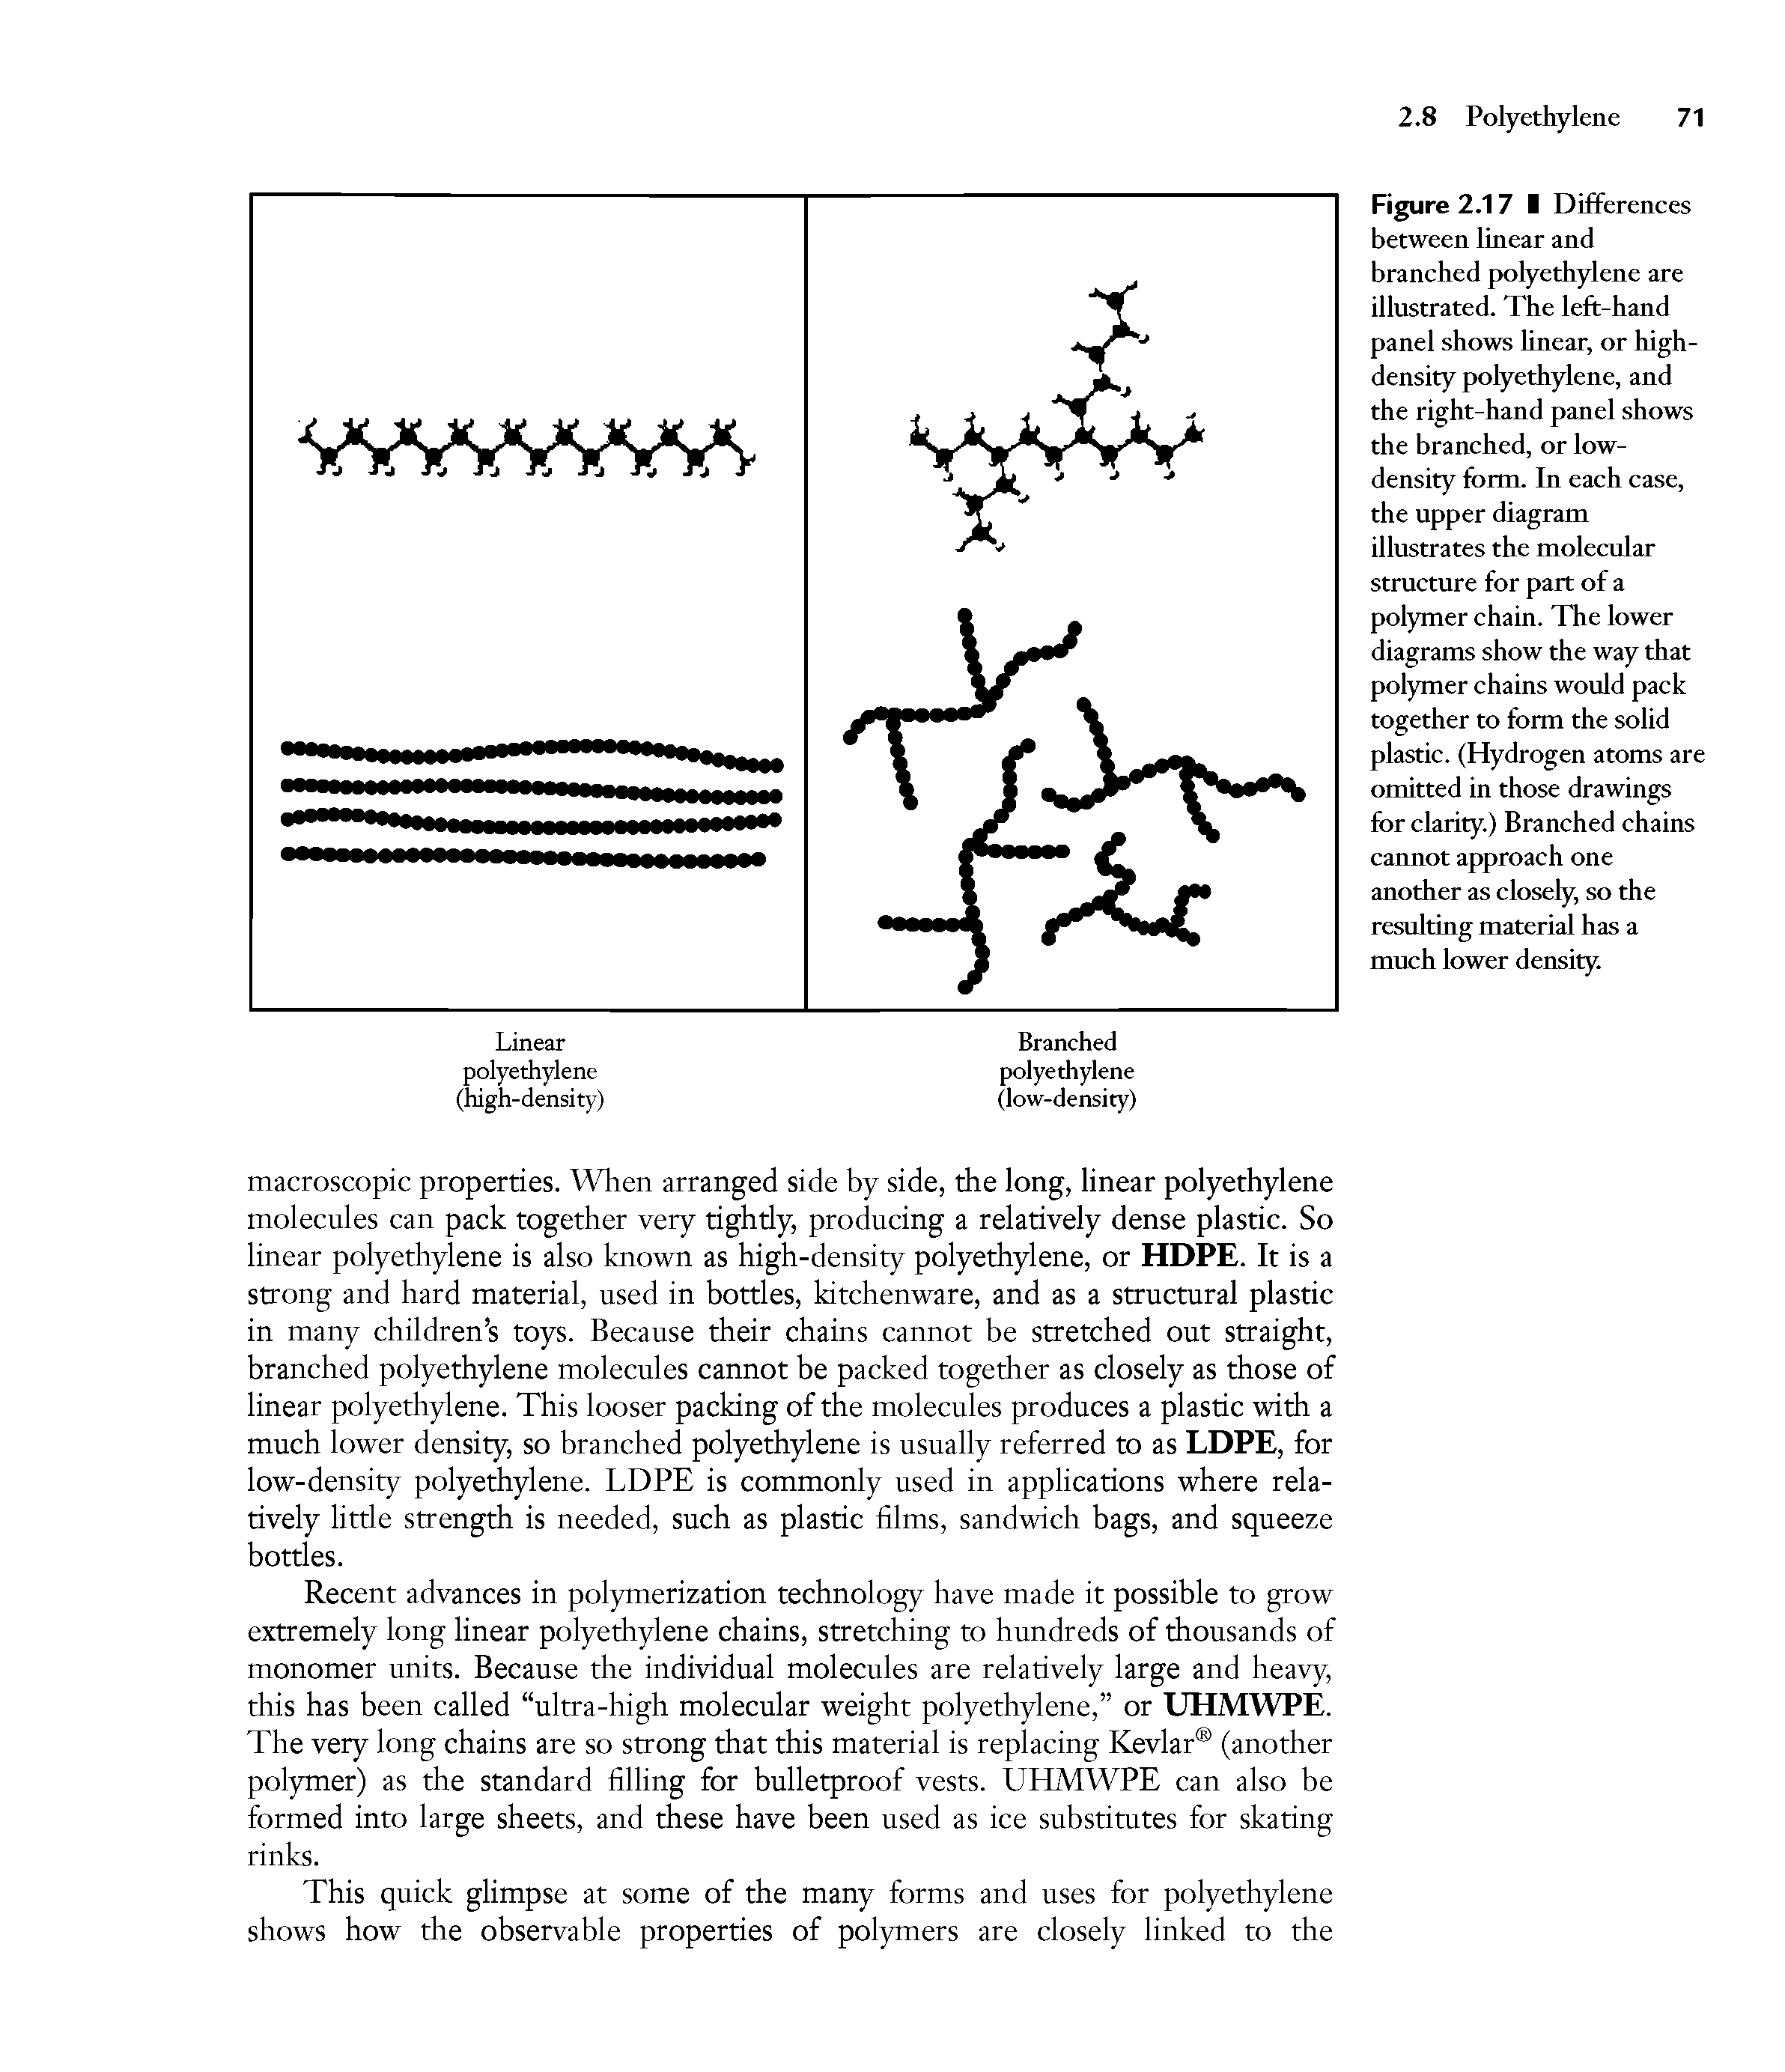 Figure 2.17 I Differences between linear and branched polyethylene are illustrated. The left-hand panel shows hnear, or high-density polyethylene, and the right-hand panel shows the branched, or low-density form. In each case, the upper diagram illustrates the molecular structure for part of a polymer chain. The lower diagrams show the way that polymer chains would pack together to form the solid plastic. (Hydrogen atoms are omitted in those drawings ft)r clarity.) Branched chains cannot approach one another as closely, so the resulting material has a much lower density.